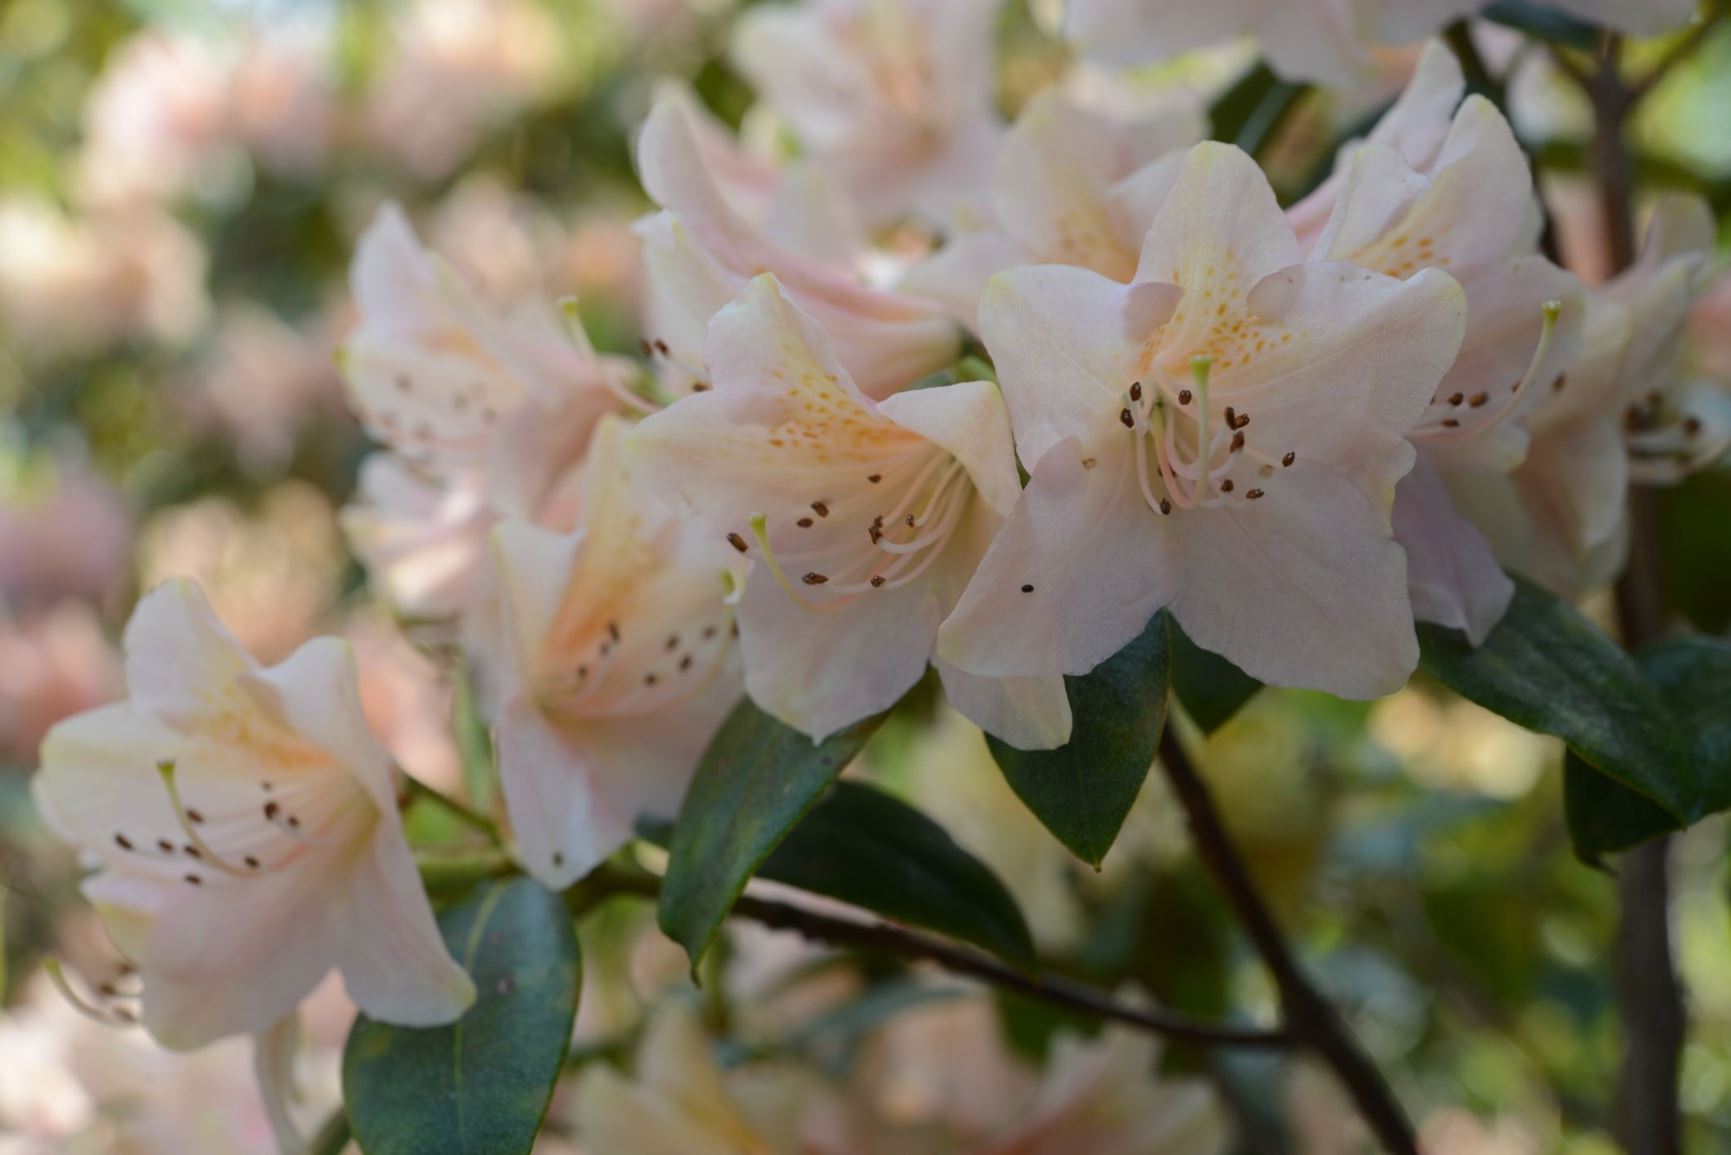 Rhododendron 'Hachmann's Medley'